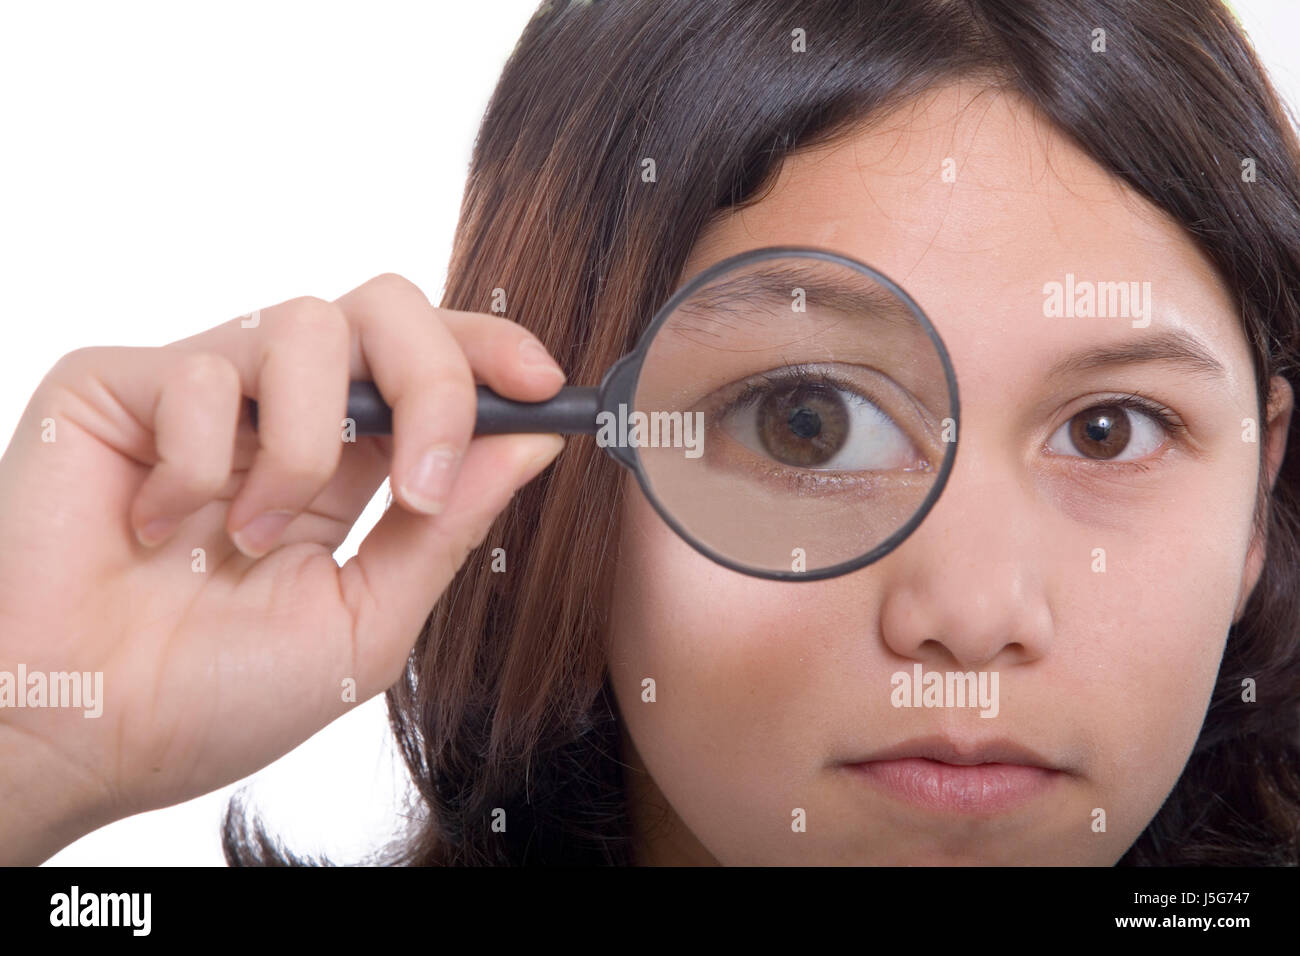 look glancing see view looking peeking looking at small tiny little short Stock Photo